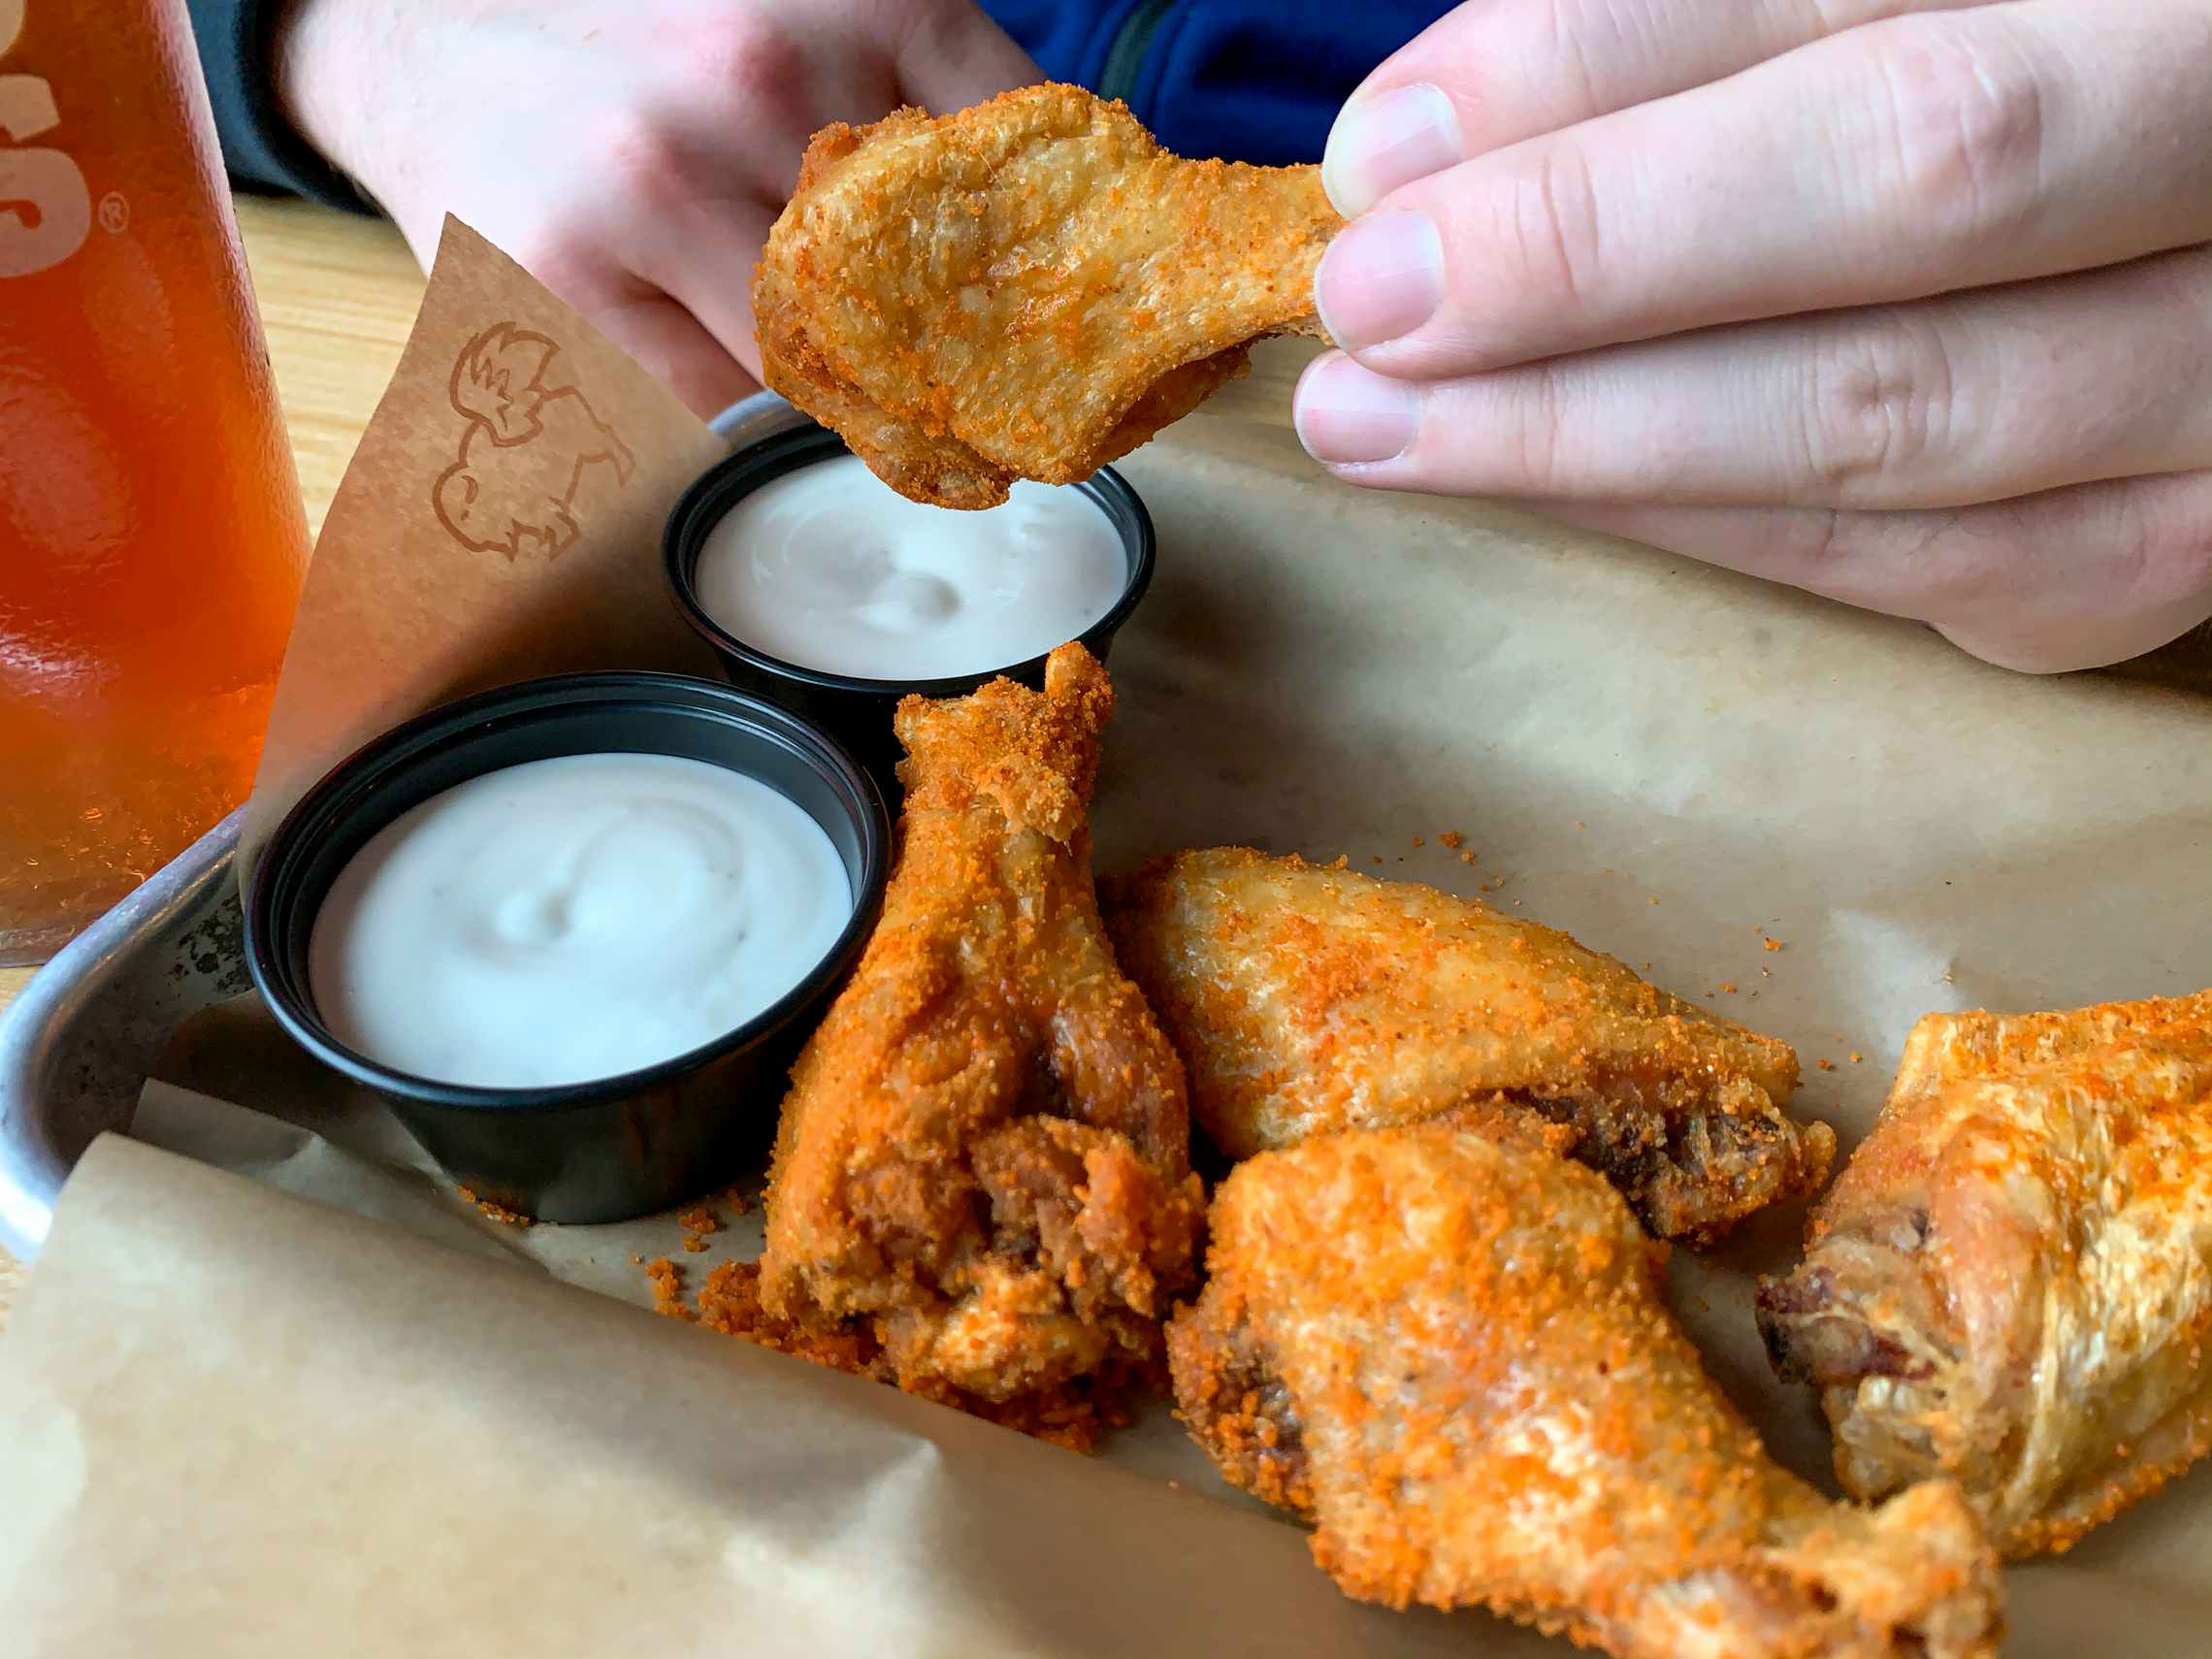 A dry rub seasoned traditional buffalo wings being dipped into ranch dressing.